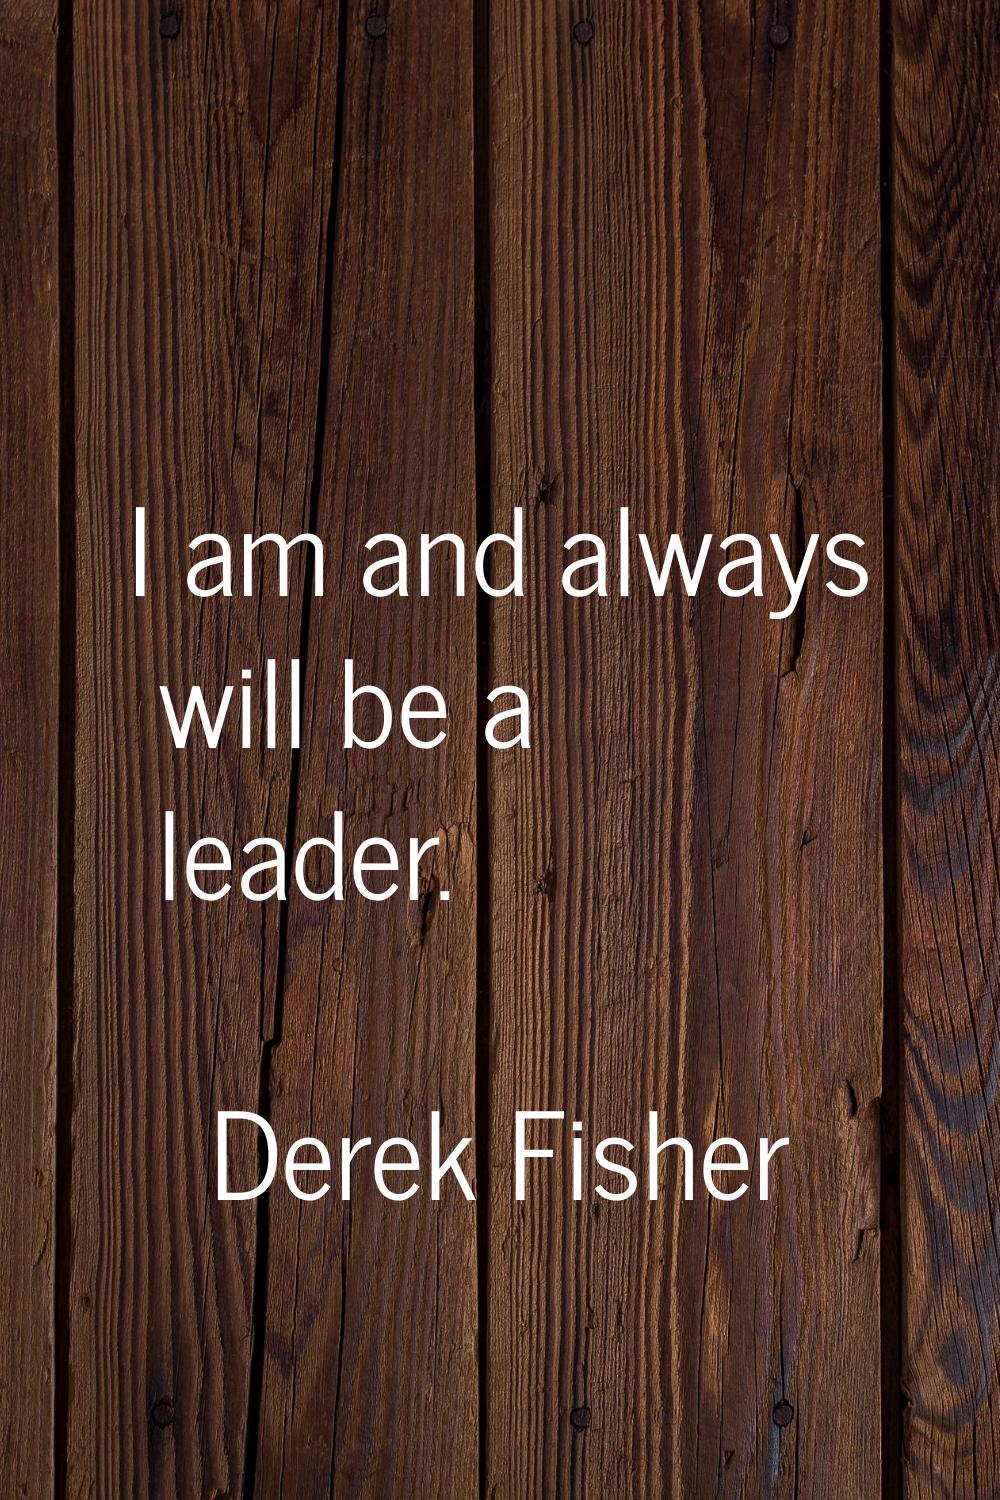 I am and always will be a leader.